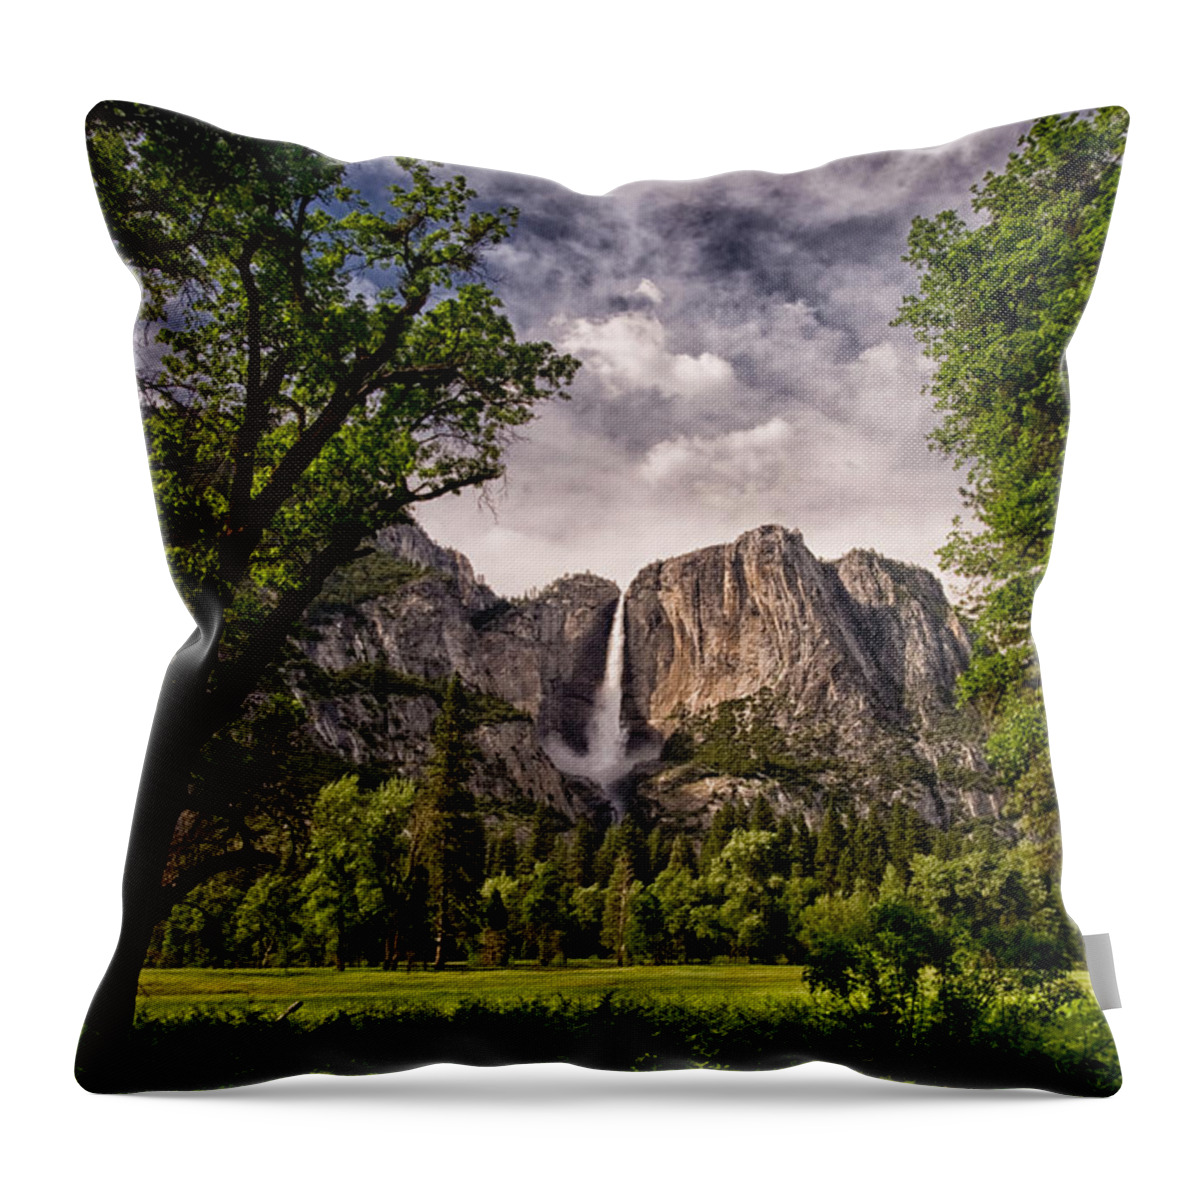 Water River Waterfall Mountains Yosemite National Park Sierra Nevada Landscape Scenic Nature California Sky Clouds Cloudy Day Throw Pillow featuring the photograph Yosemite Falls by Cat Connor